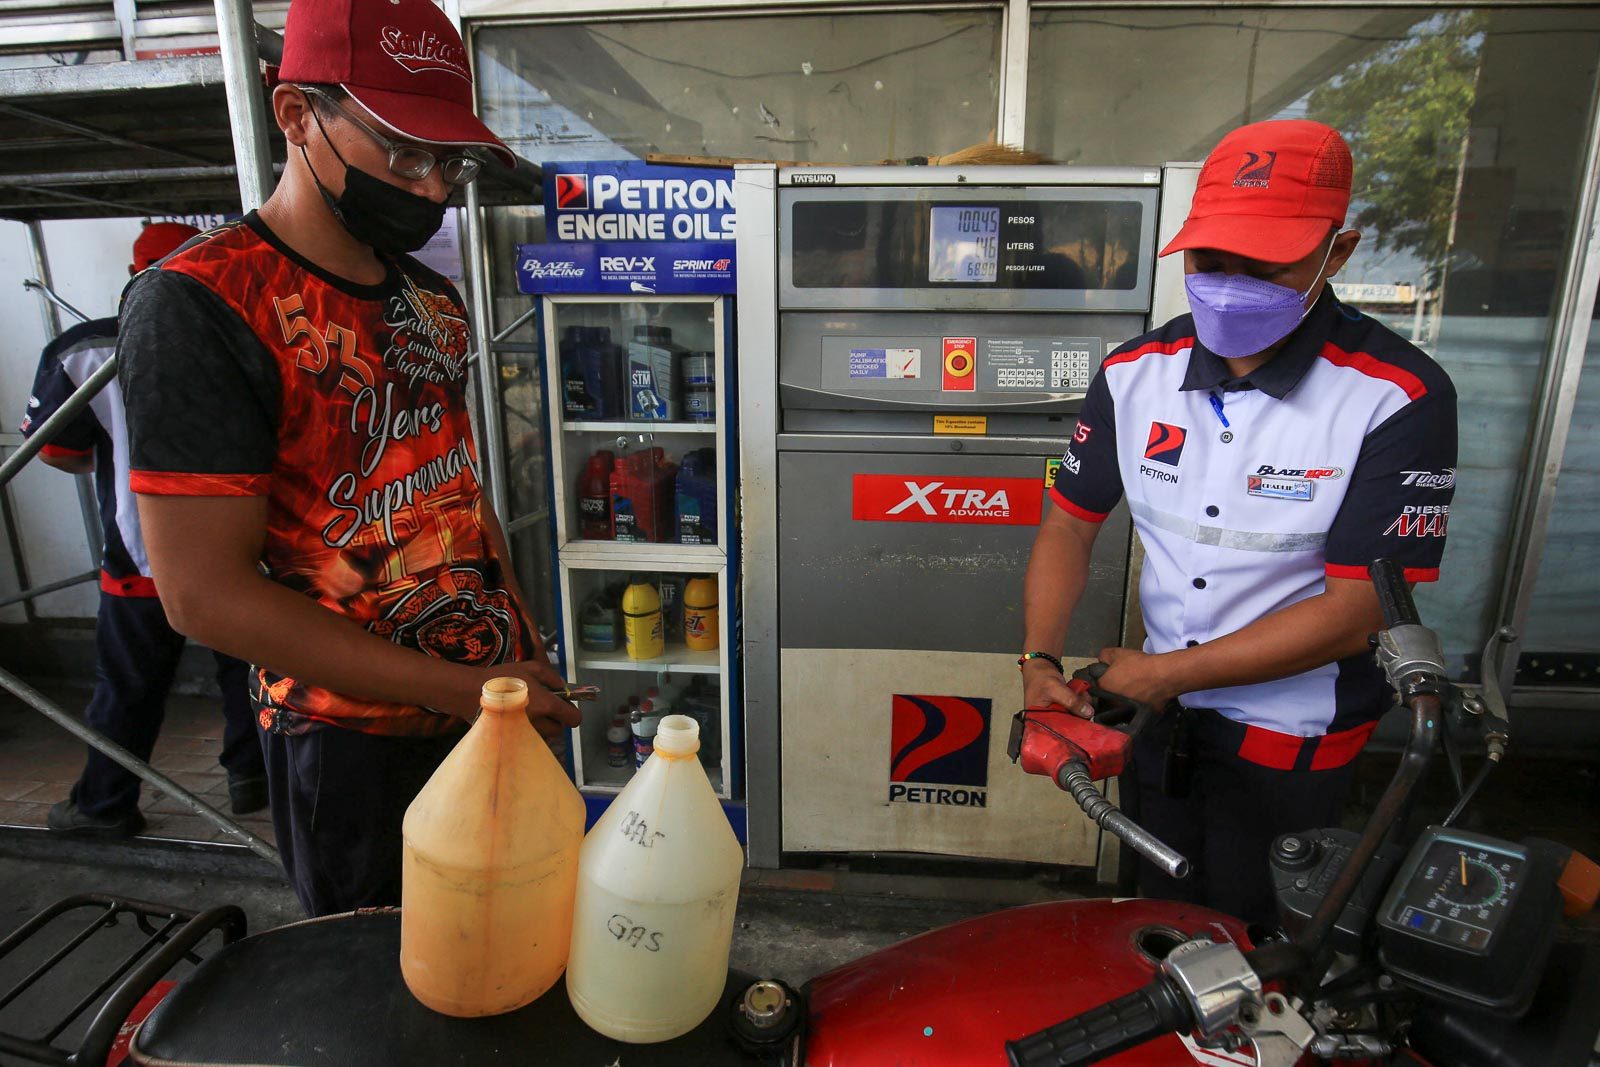 After 2 rollbacks, oil prices increasing on April 19